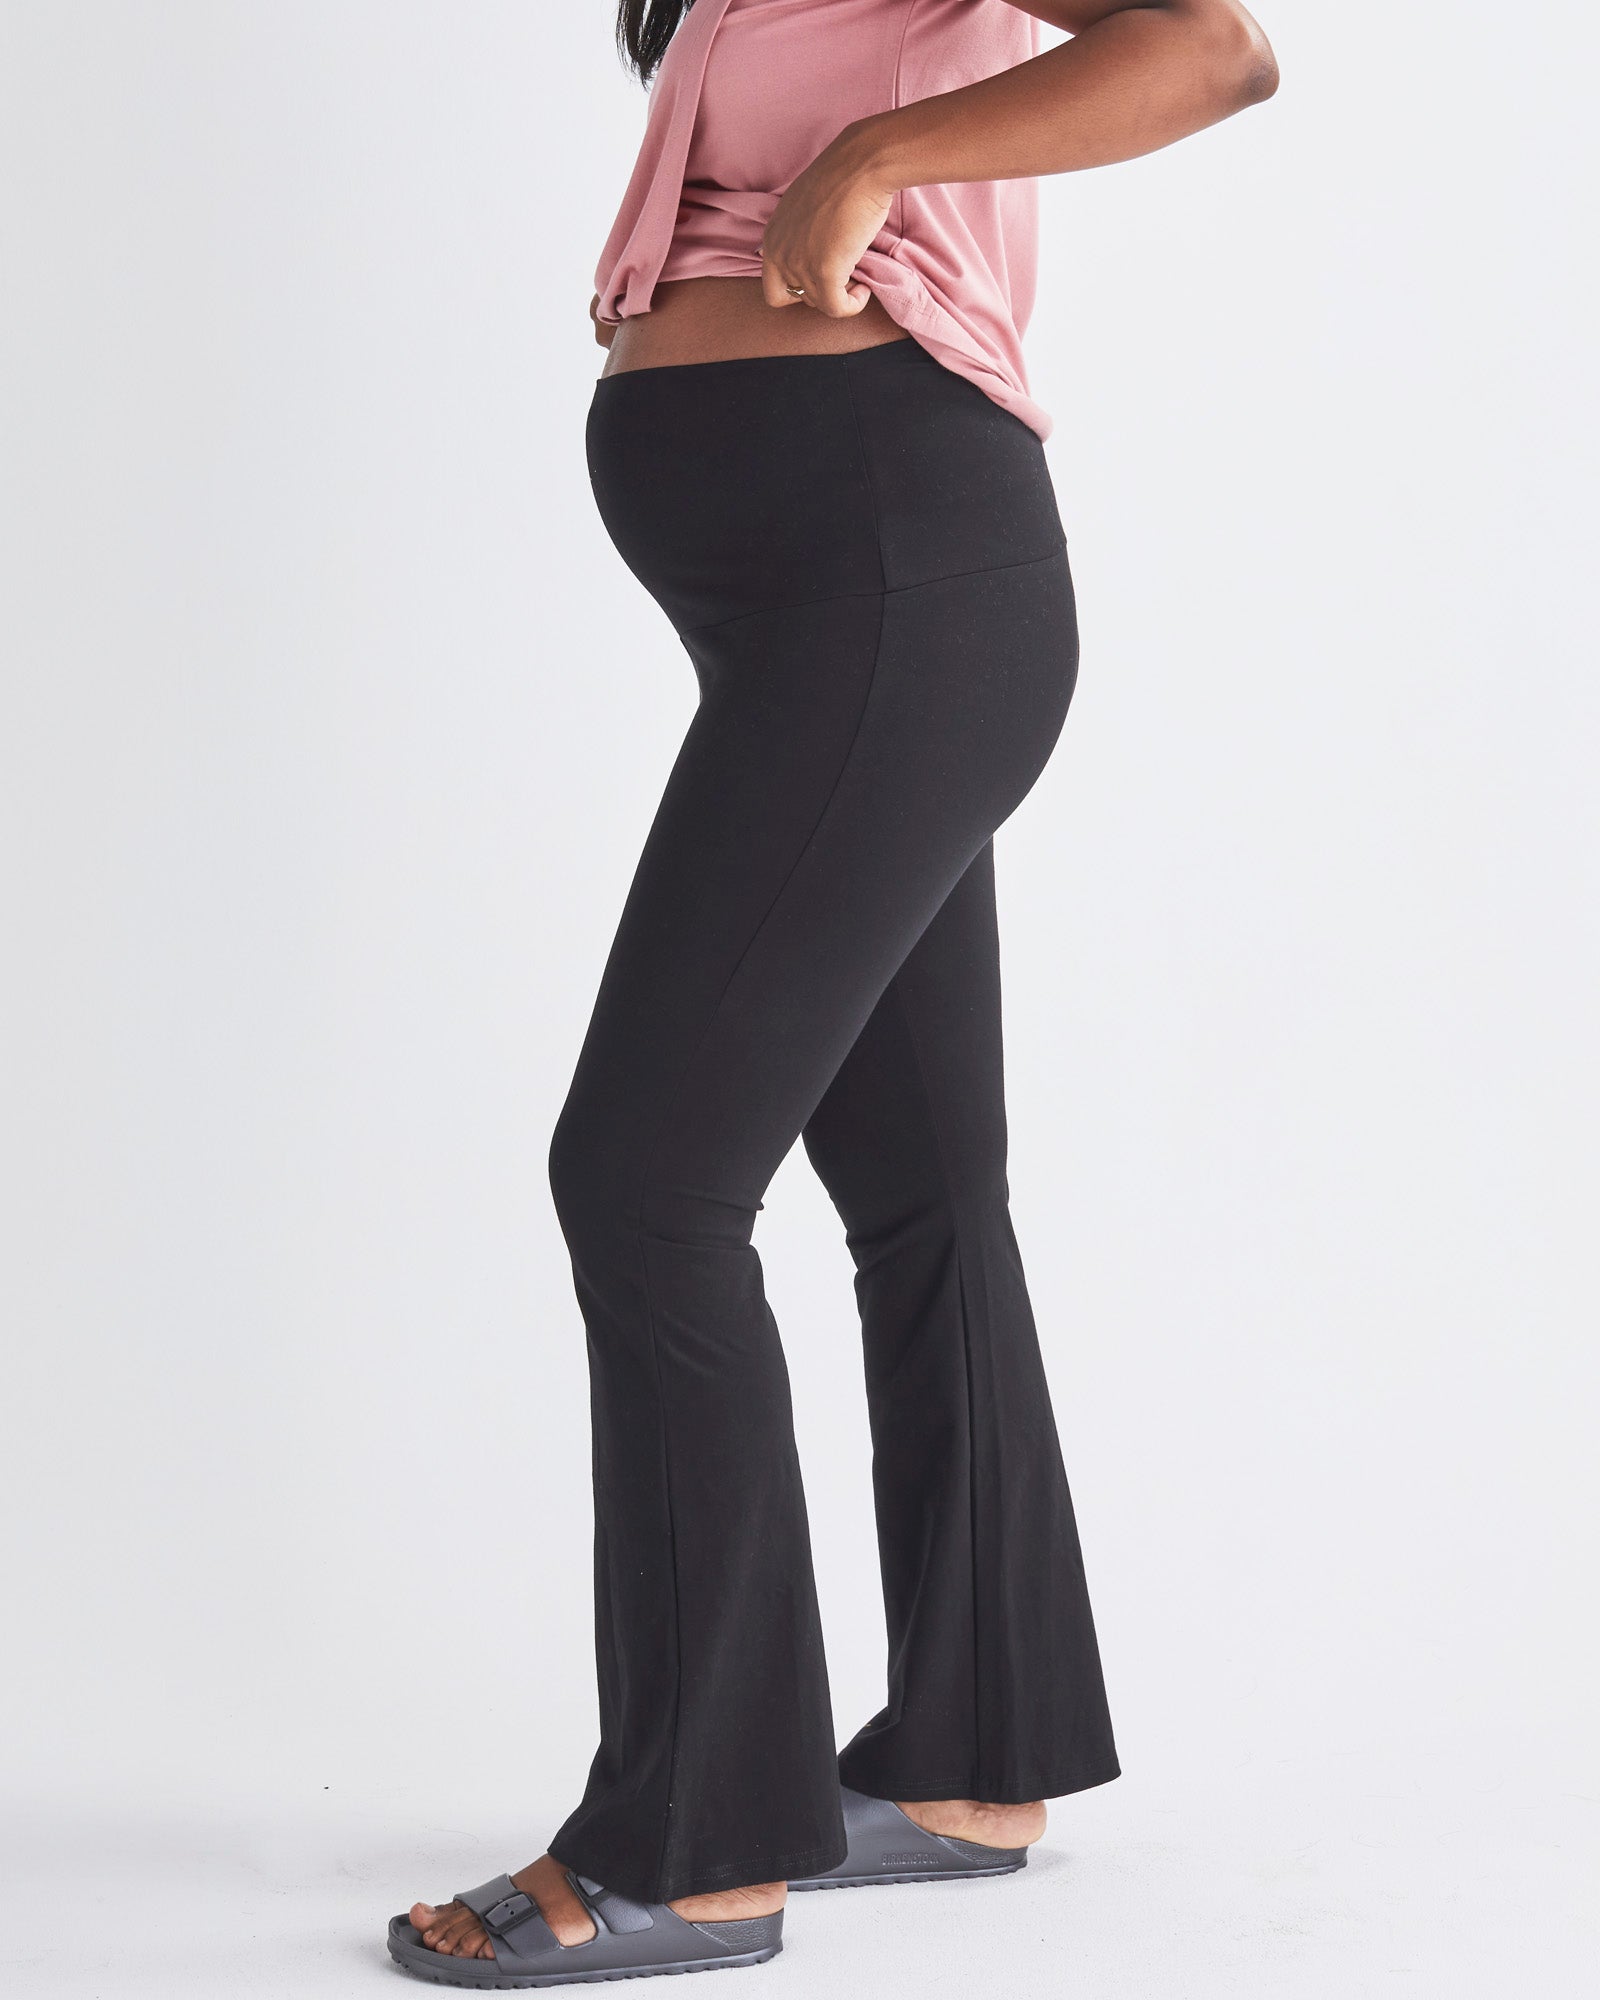 Maternity Pants Australia: Discover Comfort, Style & Support – ANGEL  MATERNITY